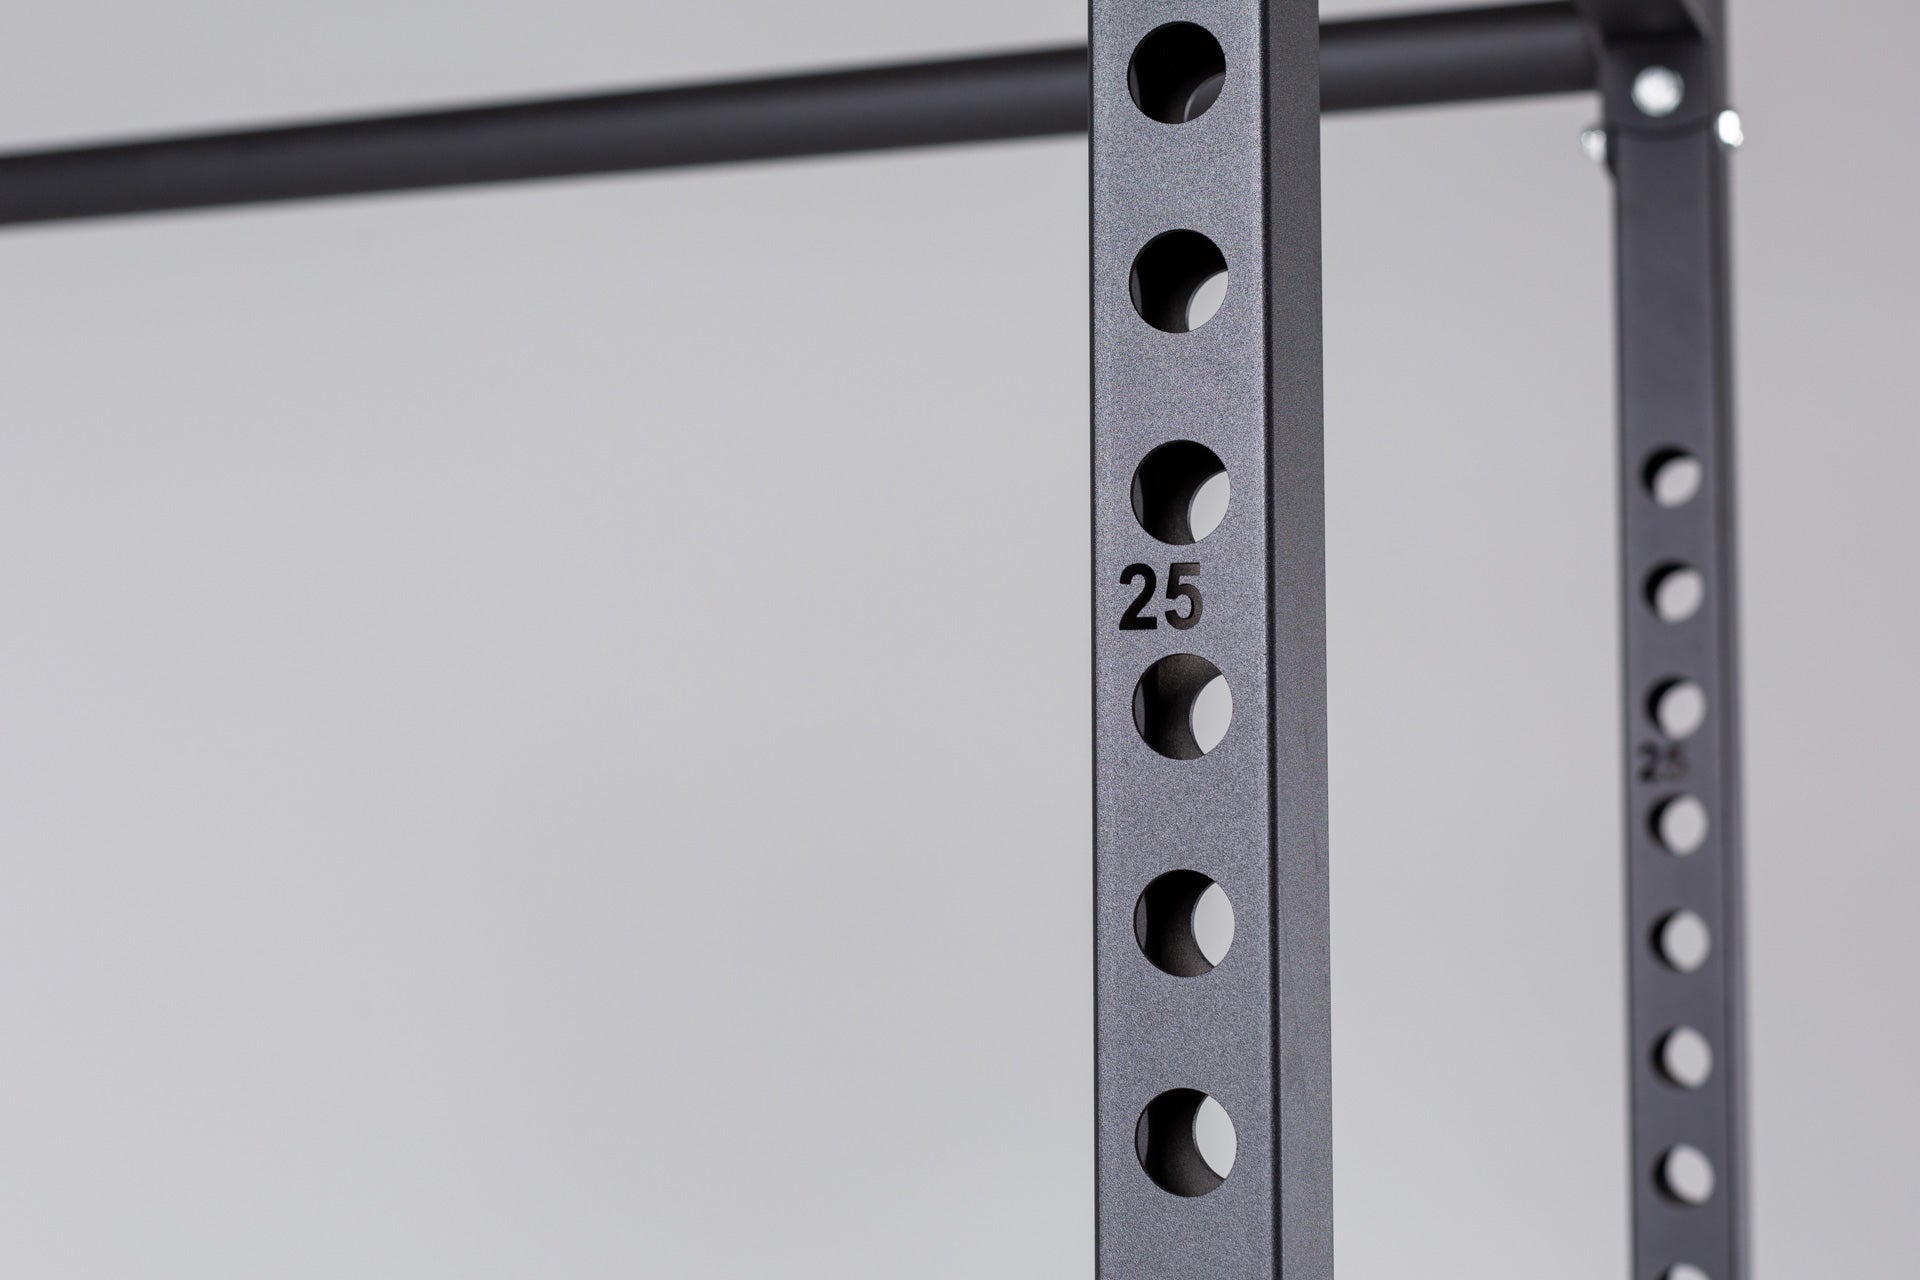 PR-1000 Power Rack Close Up of Upright Holes and Laser-Cut Number